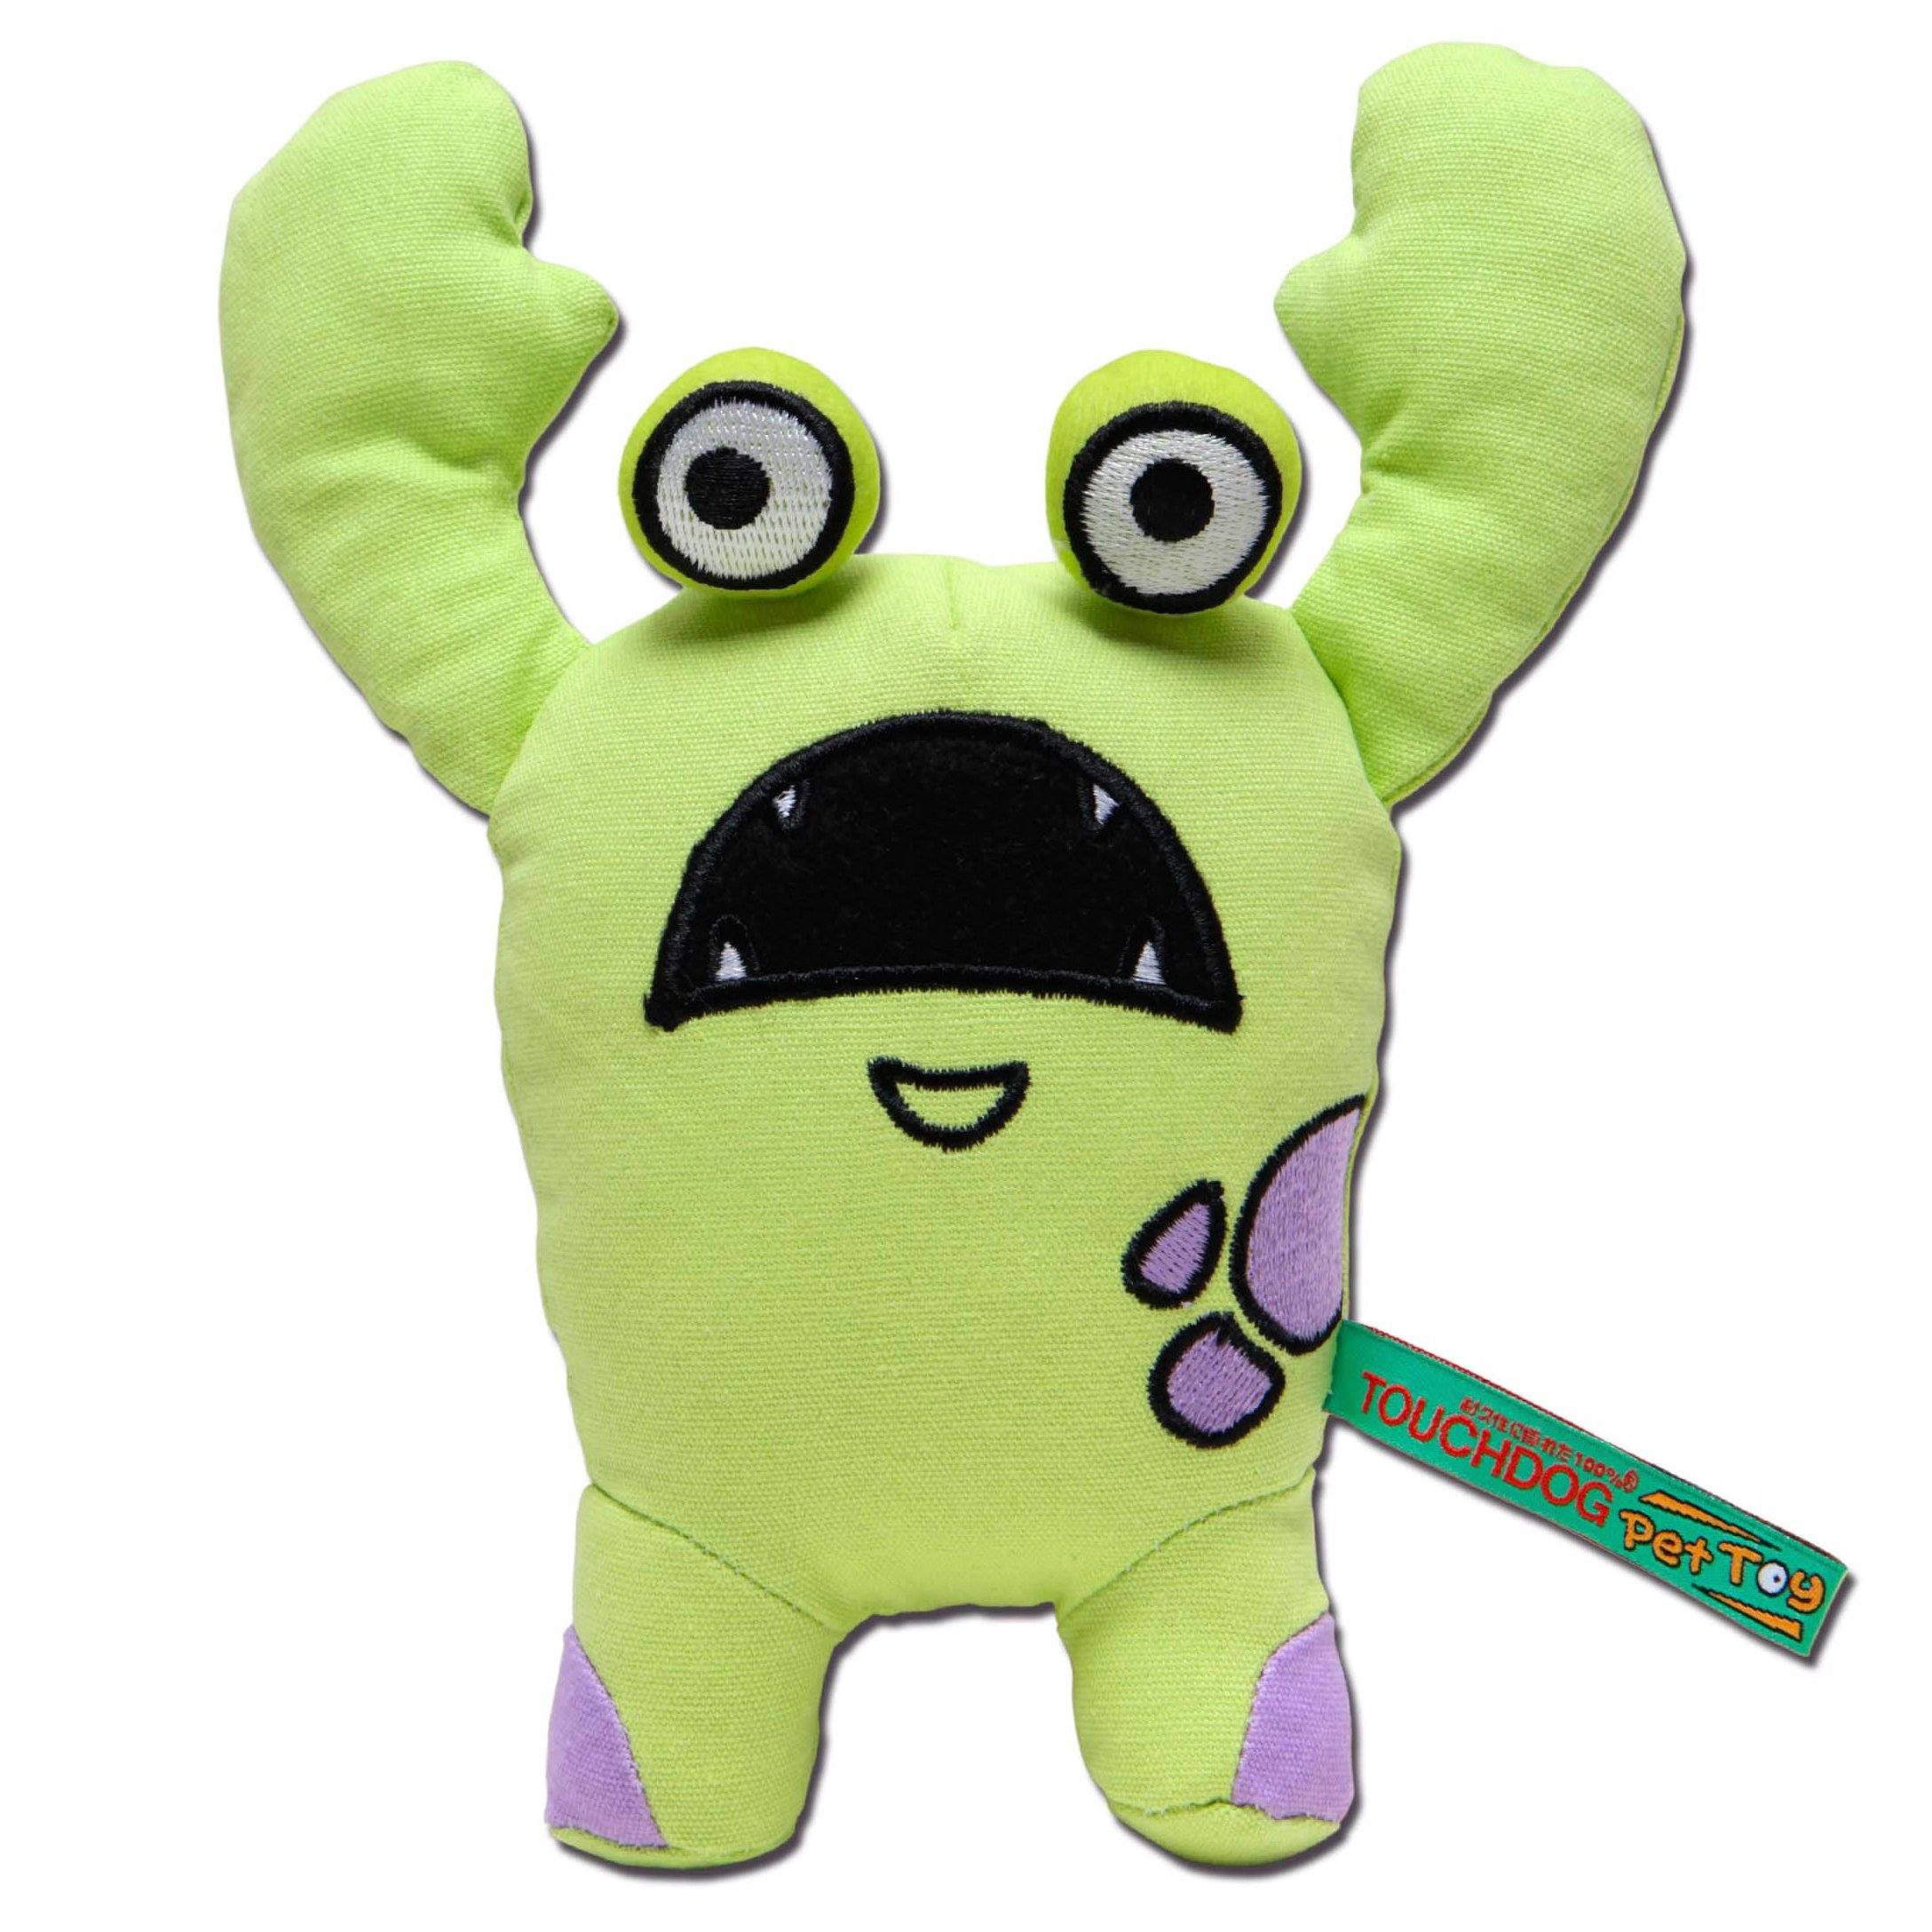 https://cdn.shopify.com/s/files/1/1772/9591/products/touchdog-cartoon-up-for-crabs-monster-plush-dog-toy-550410.jpg?v=1573795247